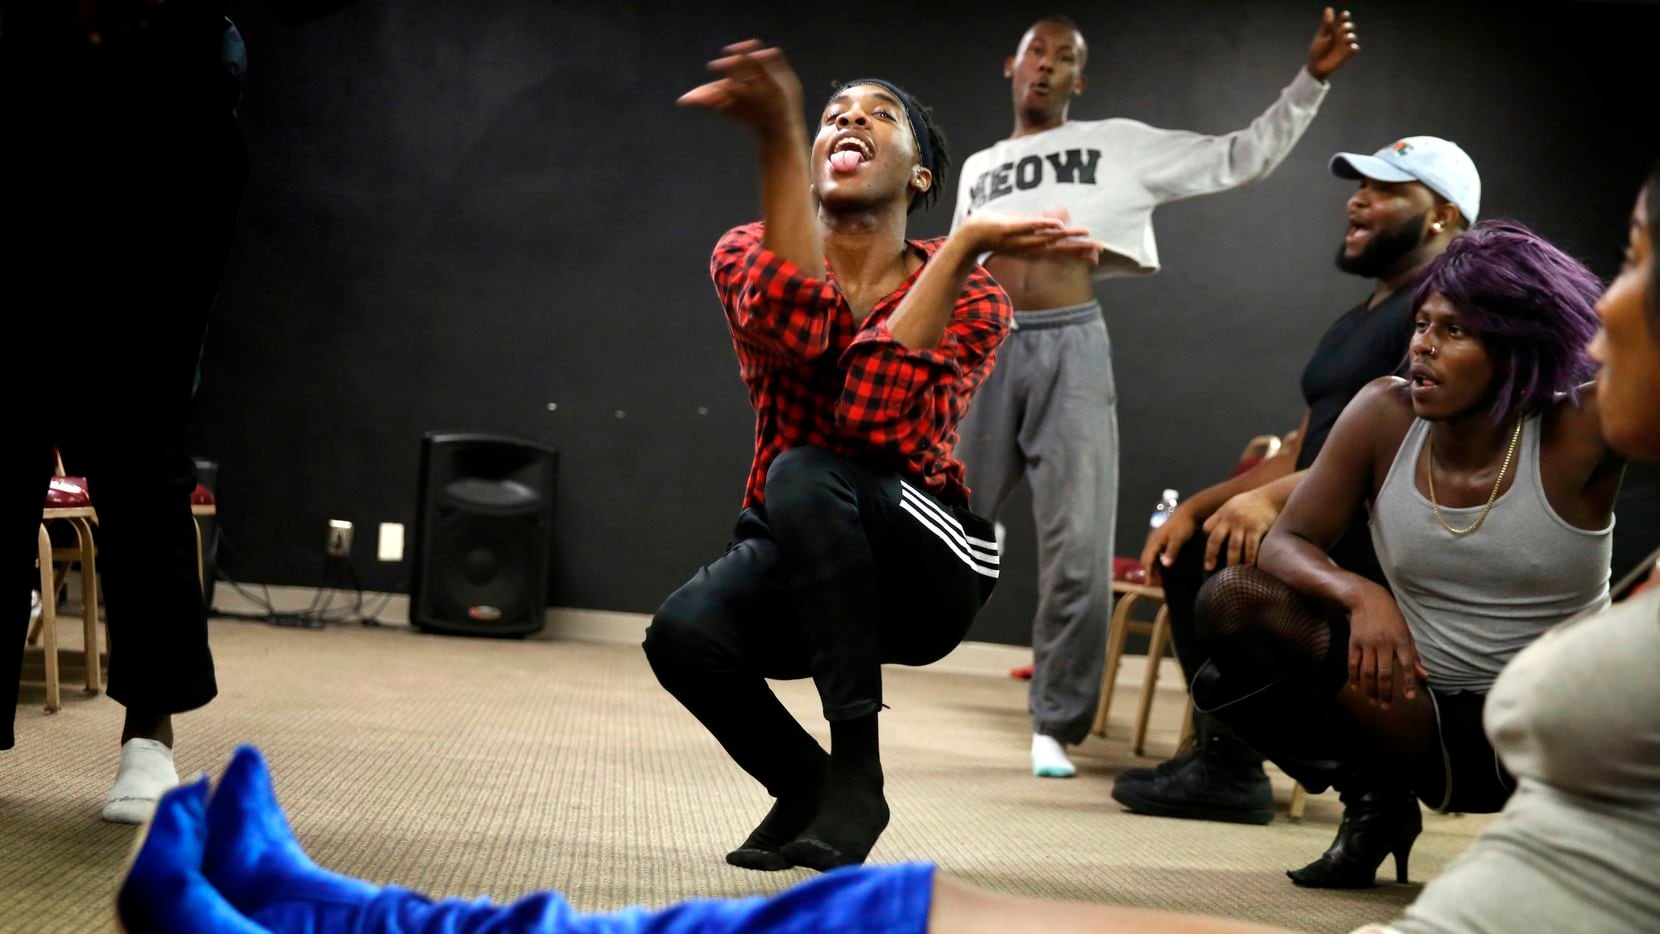 Leondrae Frank (center) vogues with others during a voguing practice at United Black...